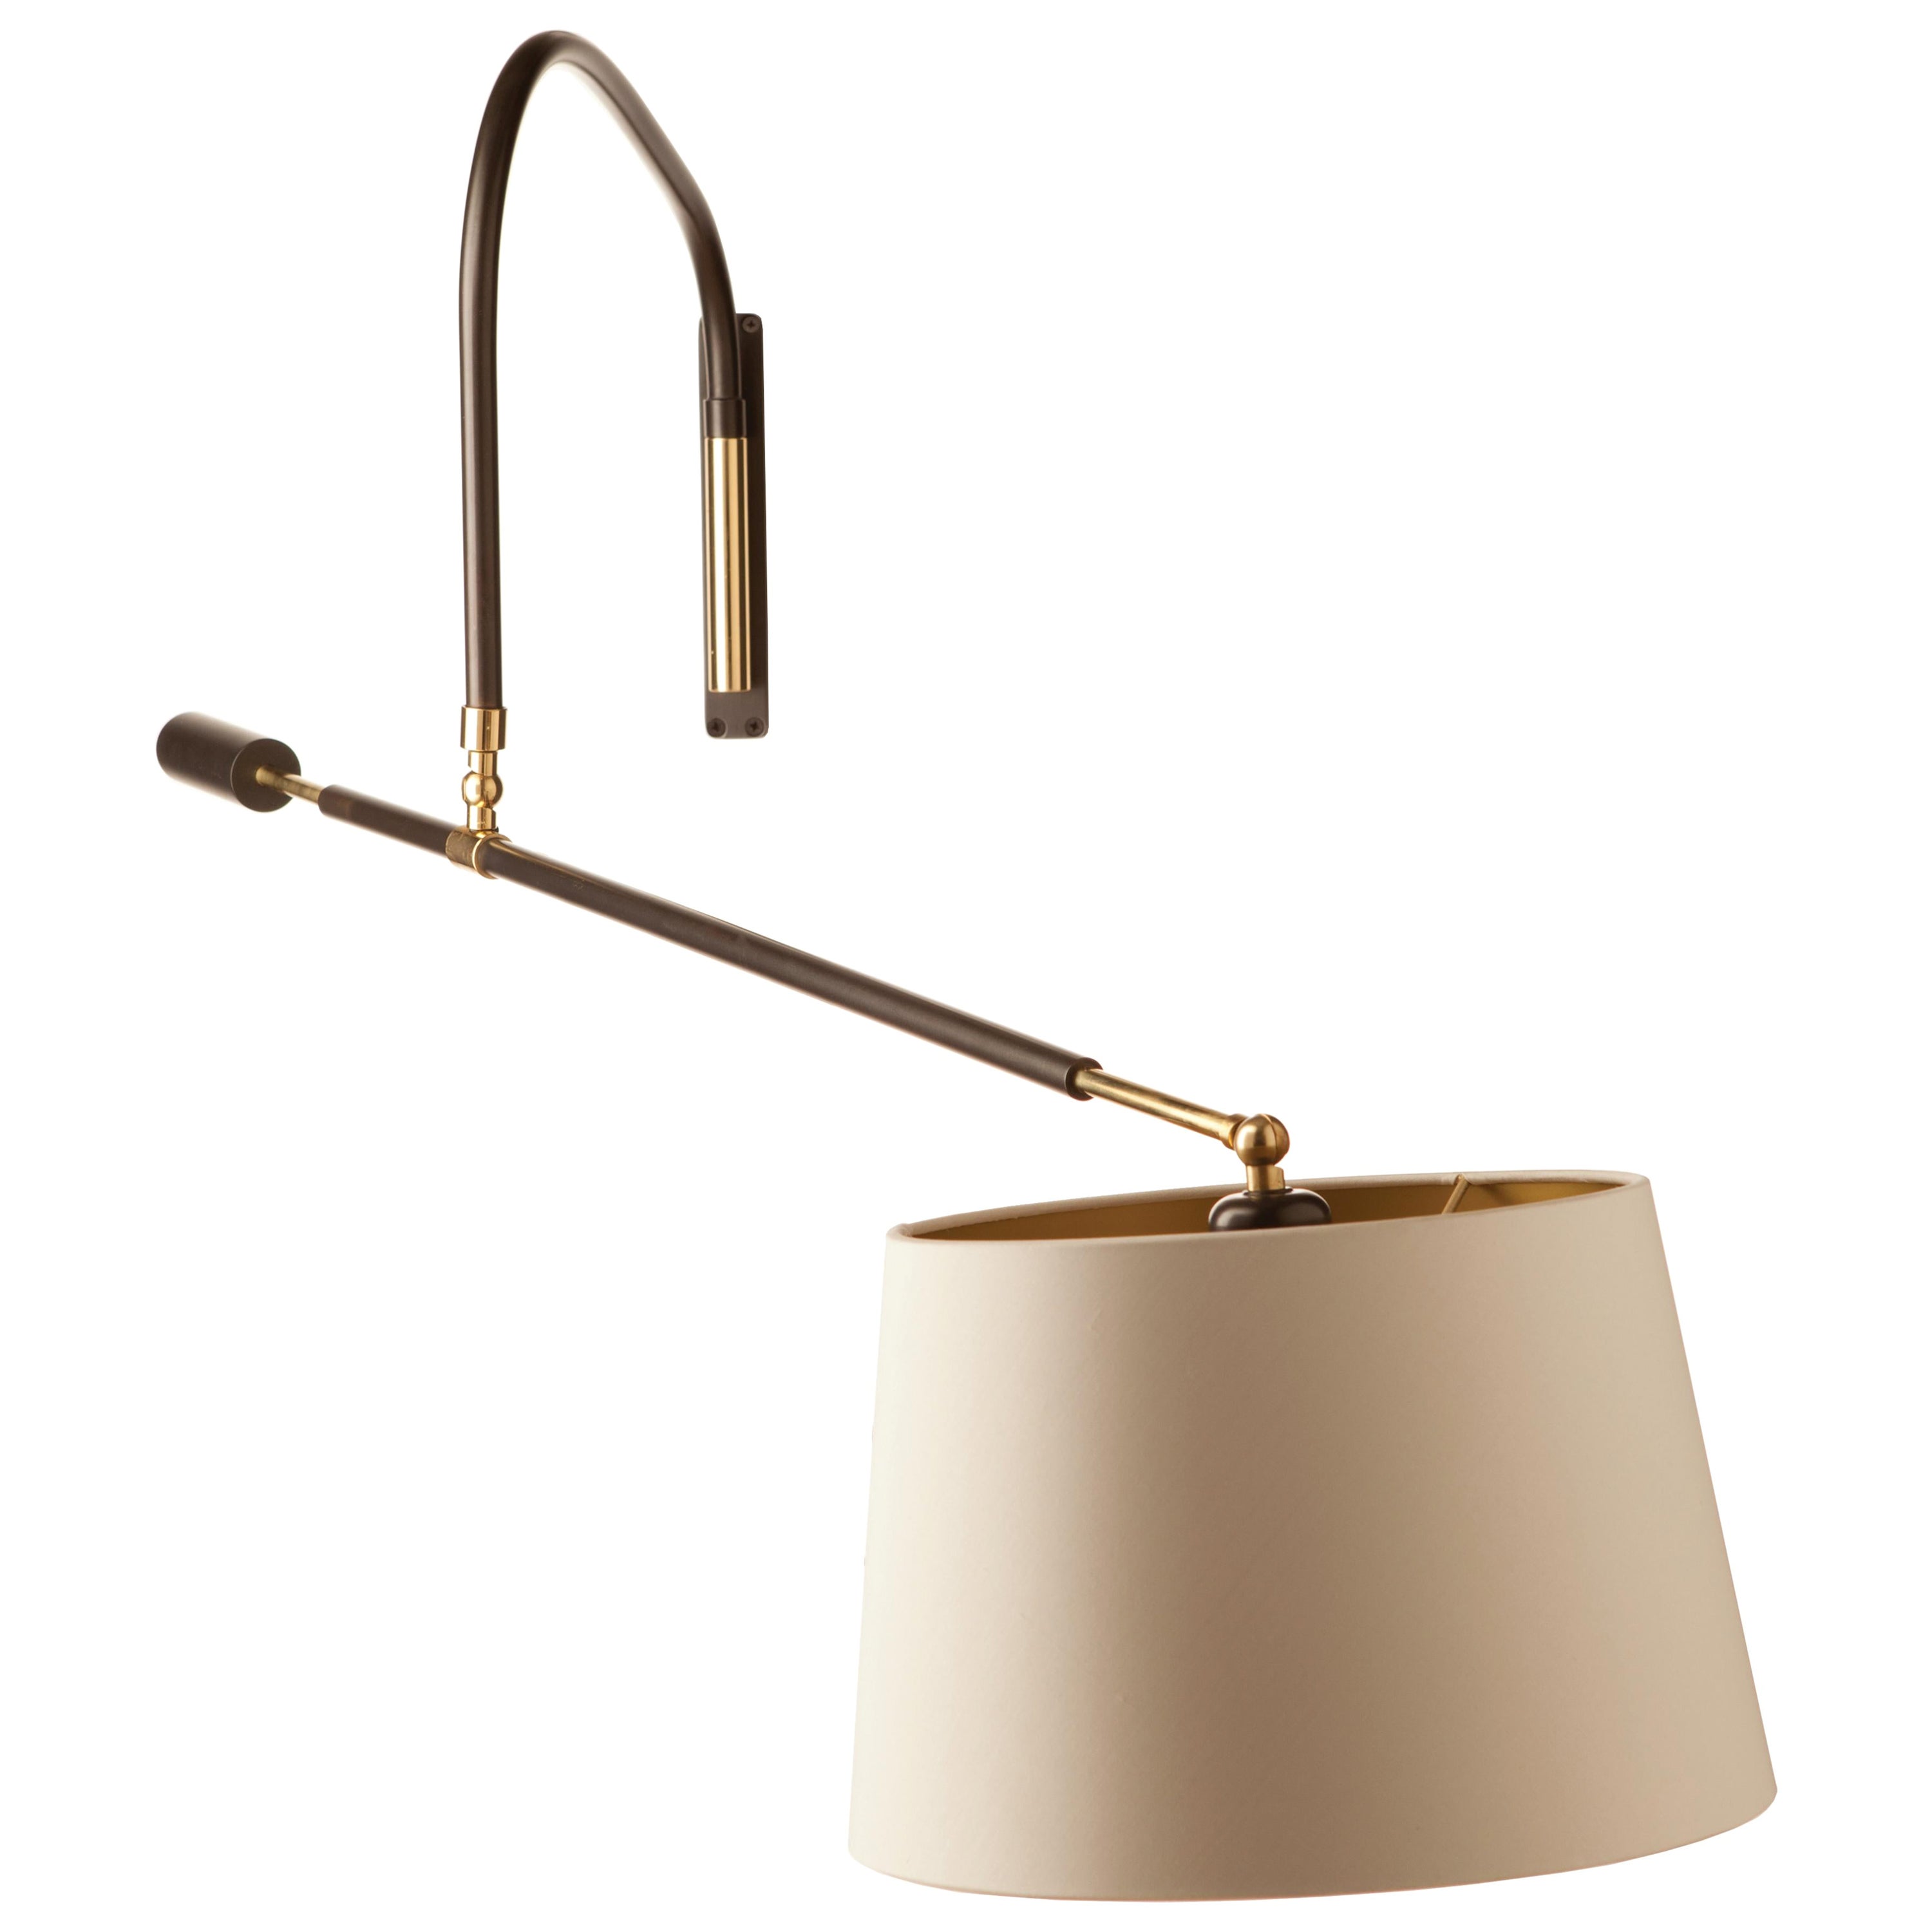 Extra Long cantilevered Swing Arm wall sconce with Silk Shade by Martinez y Orts